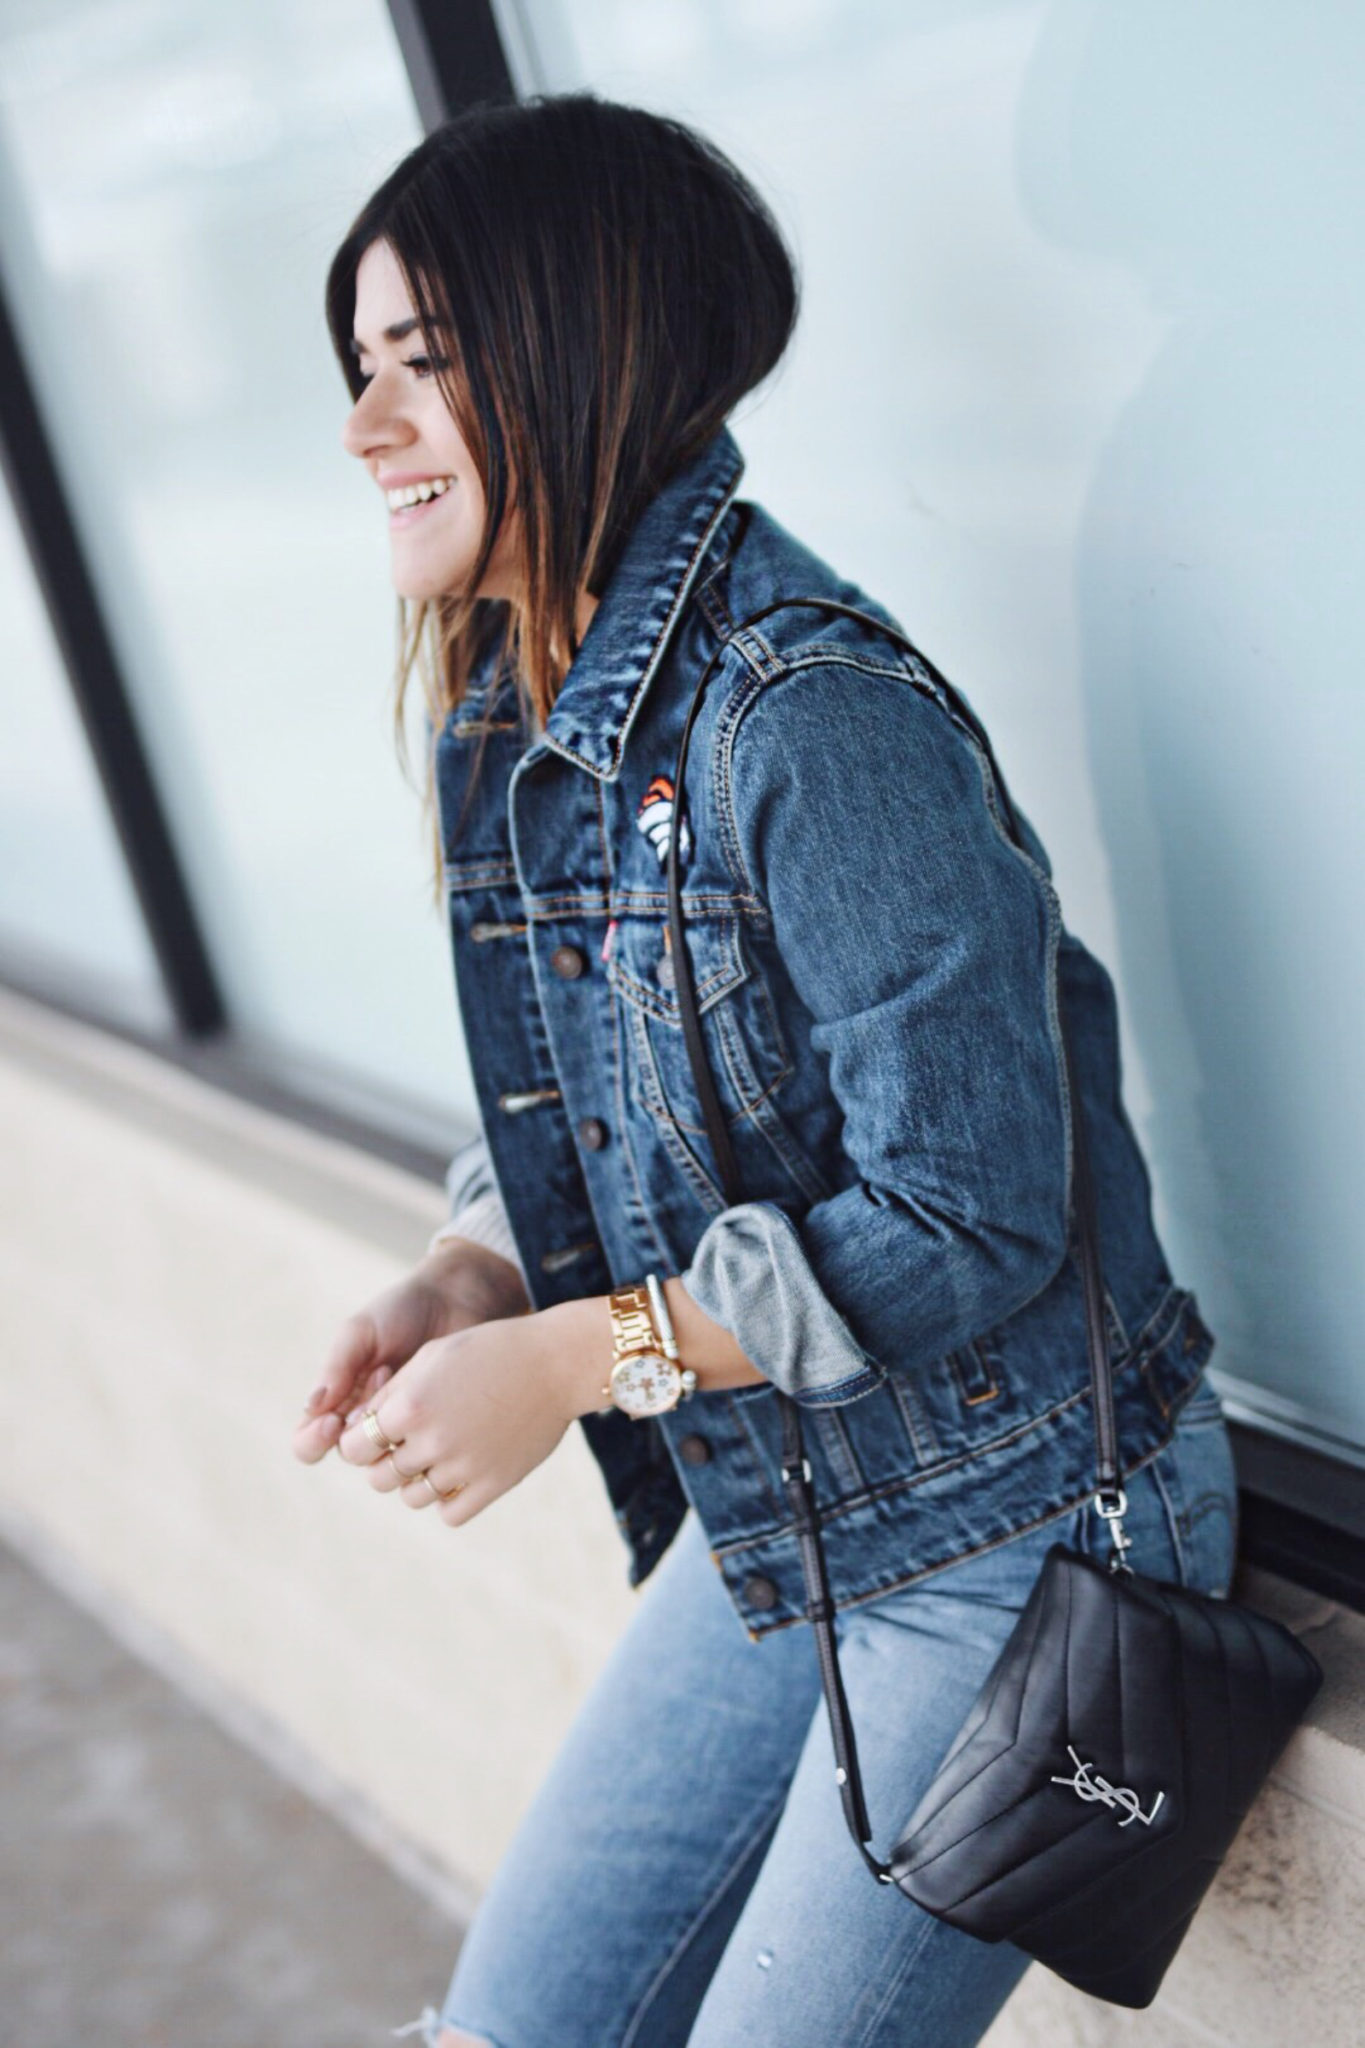 levis jacket outfit